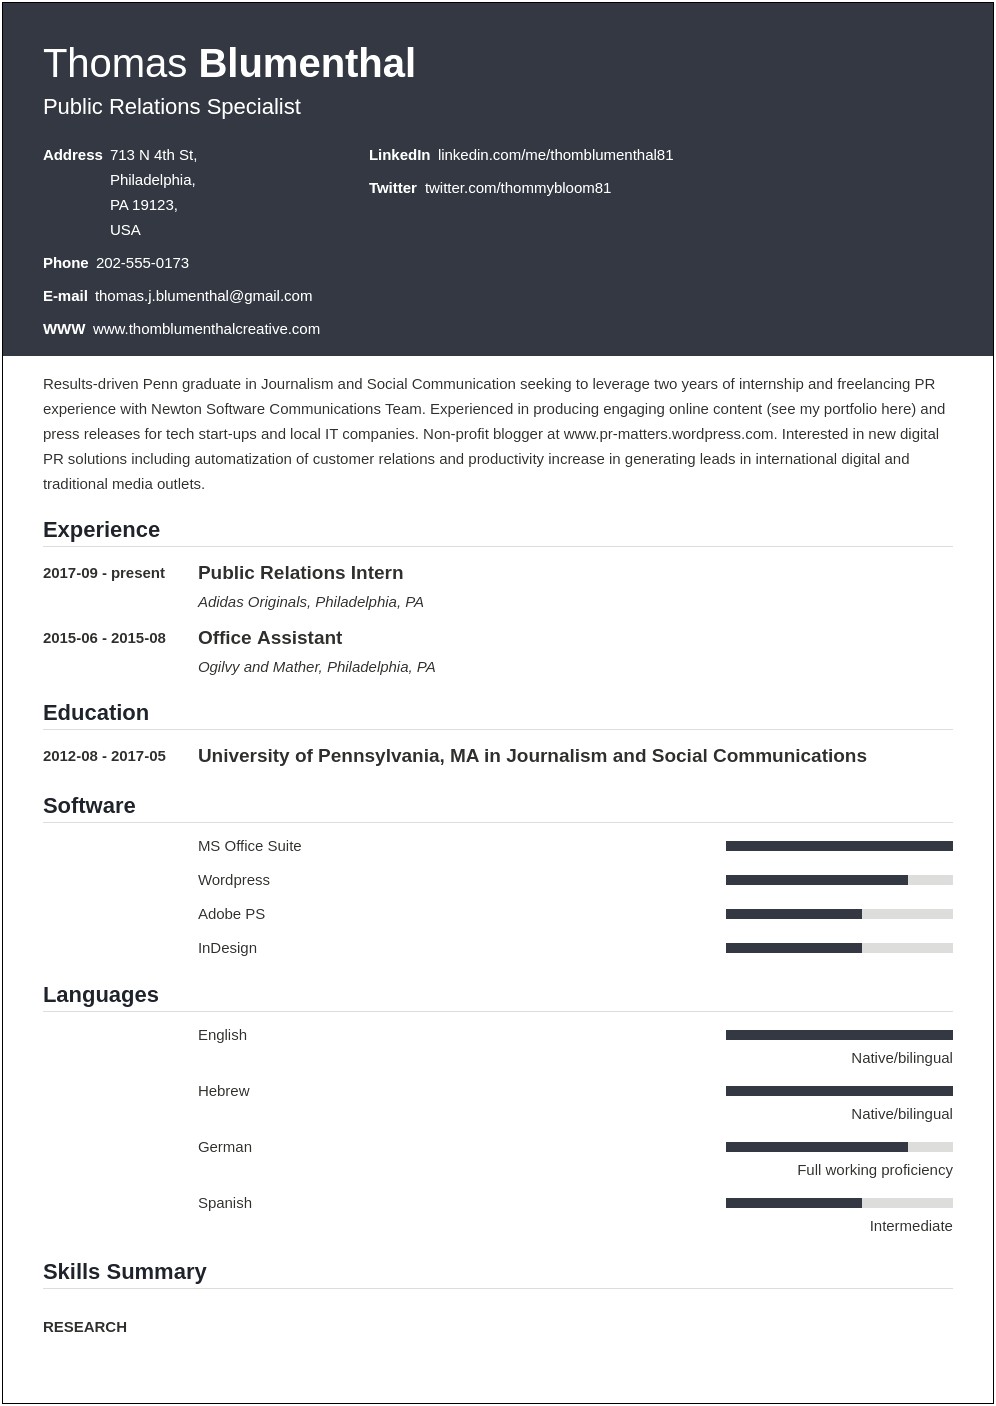 Resume Example For Different Skills